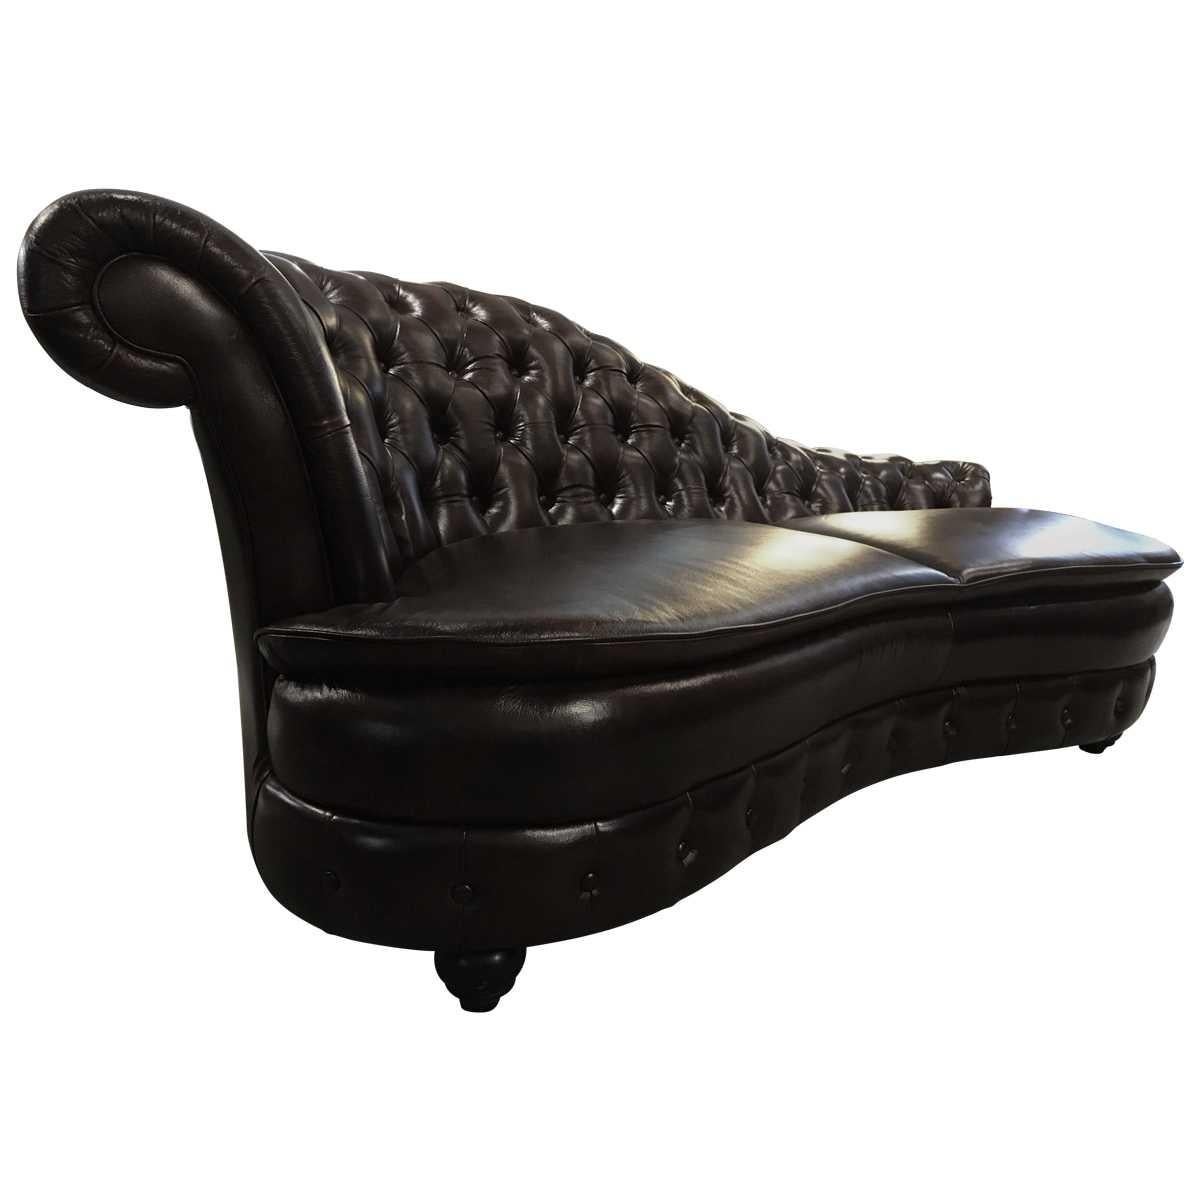 Victorian furniture takes inspiration from the reign of Queen Victoria (from 1837 to 1901). It is an elegant style, characterized by ornate carvings, dark woods, and heavy luxurious fabrics.
Vintage button tufted ox blood leather chaise.
Features